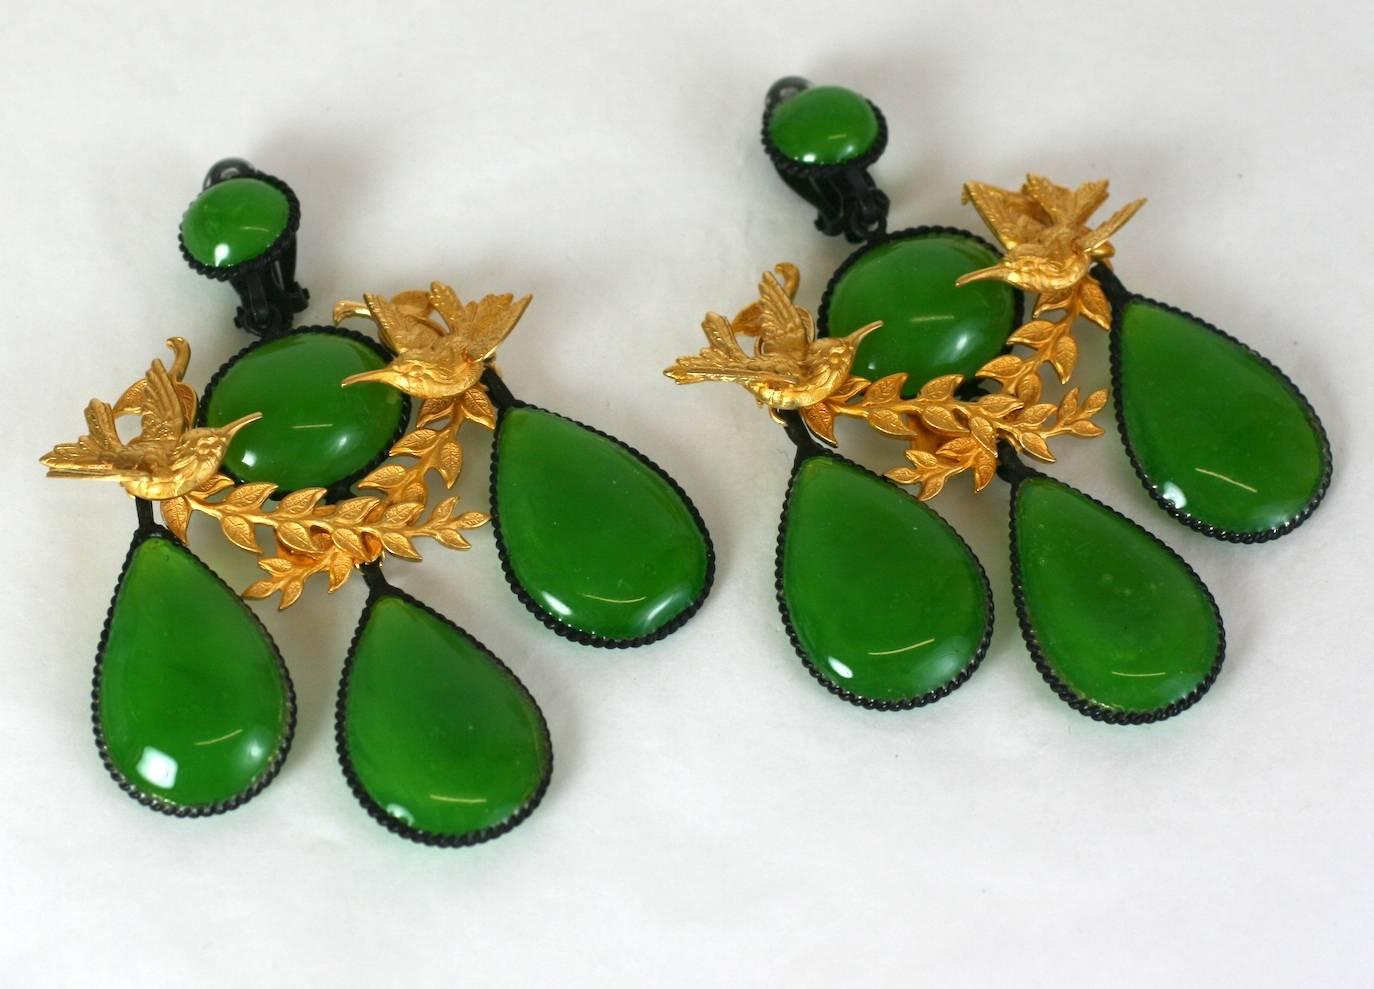 Oversized Girandole Garland Earrings handmade in the Parisian studios of MWLC. An late 18th century classic form reworked in blackened and gilt metal with opaline lime green pate de verre poured glass. A garland of gilt songbirds completes the